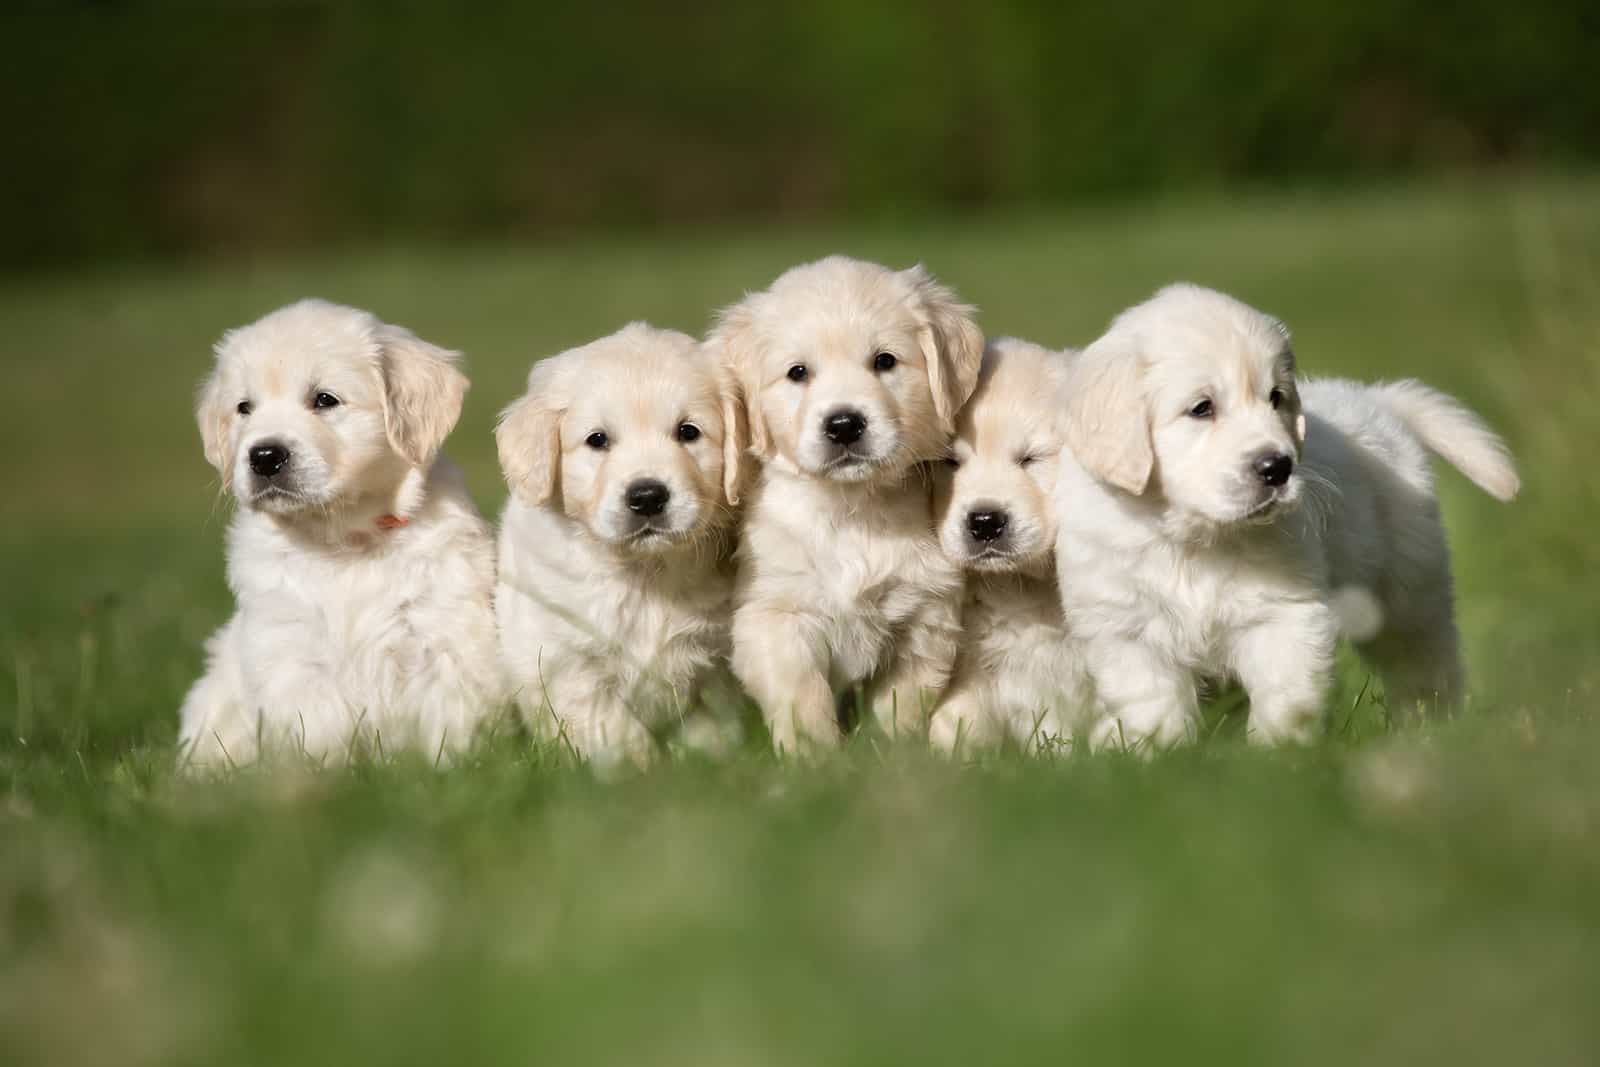 five cute purebred golden retriever puppies outdoors in the nature on grass meadow